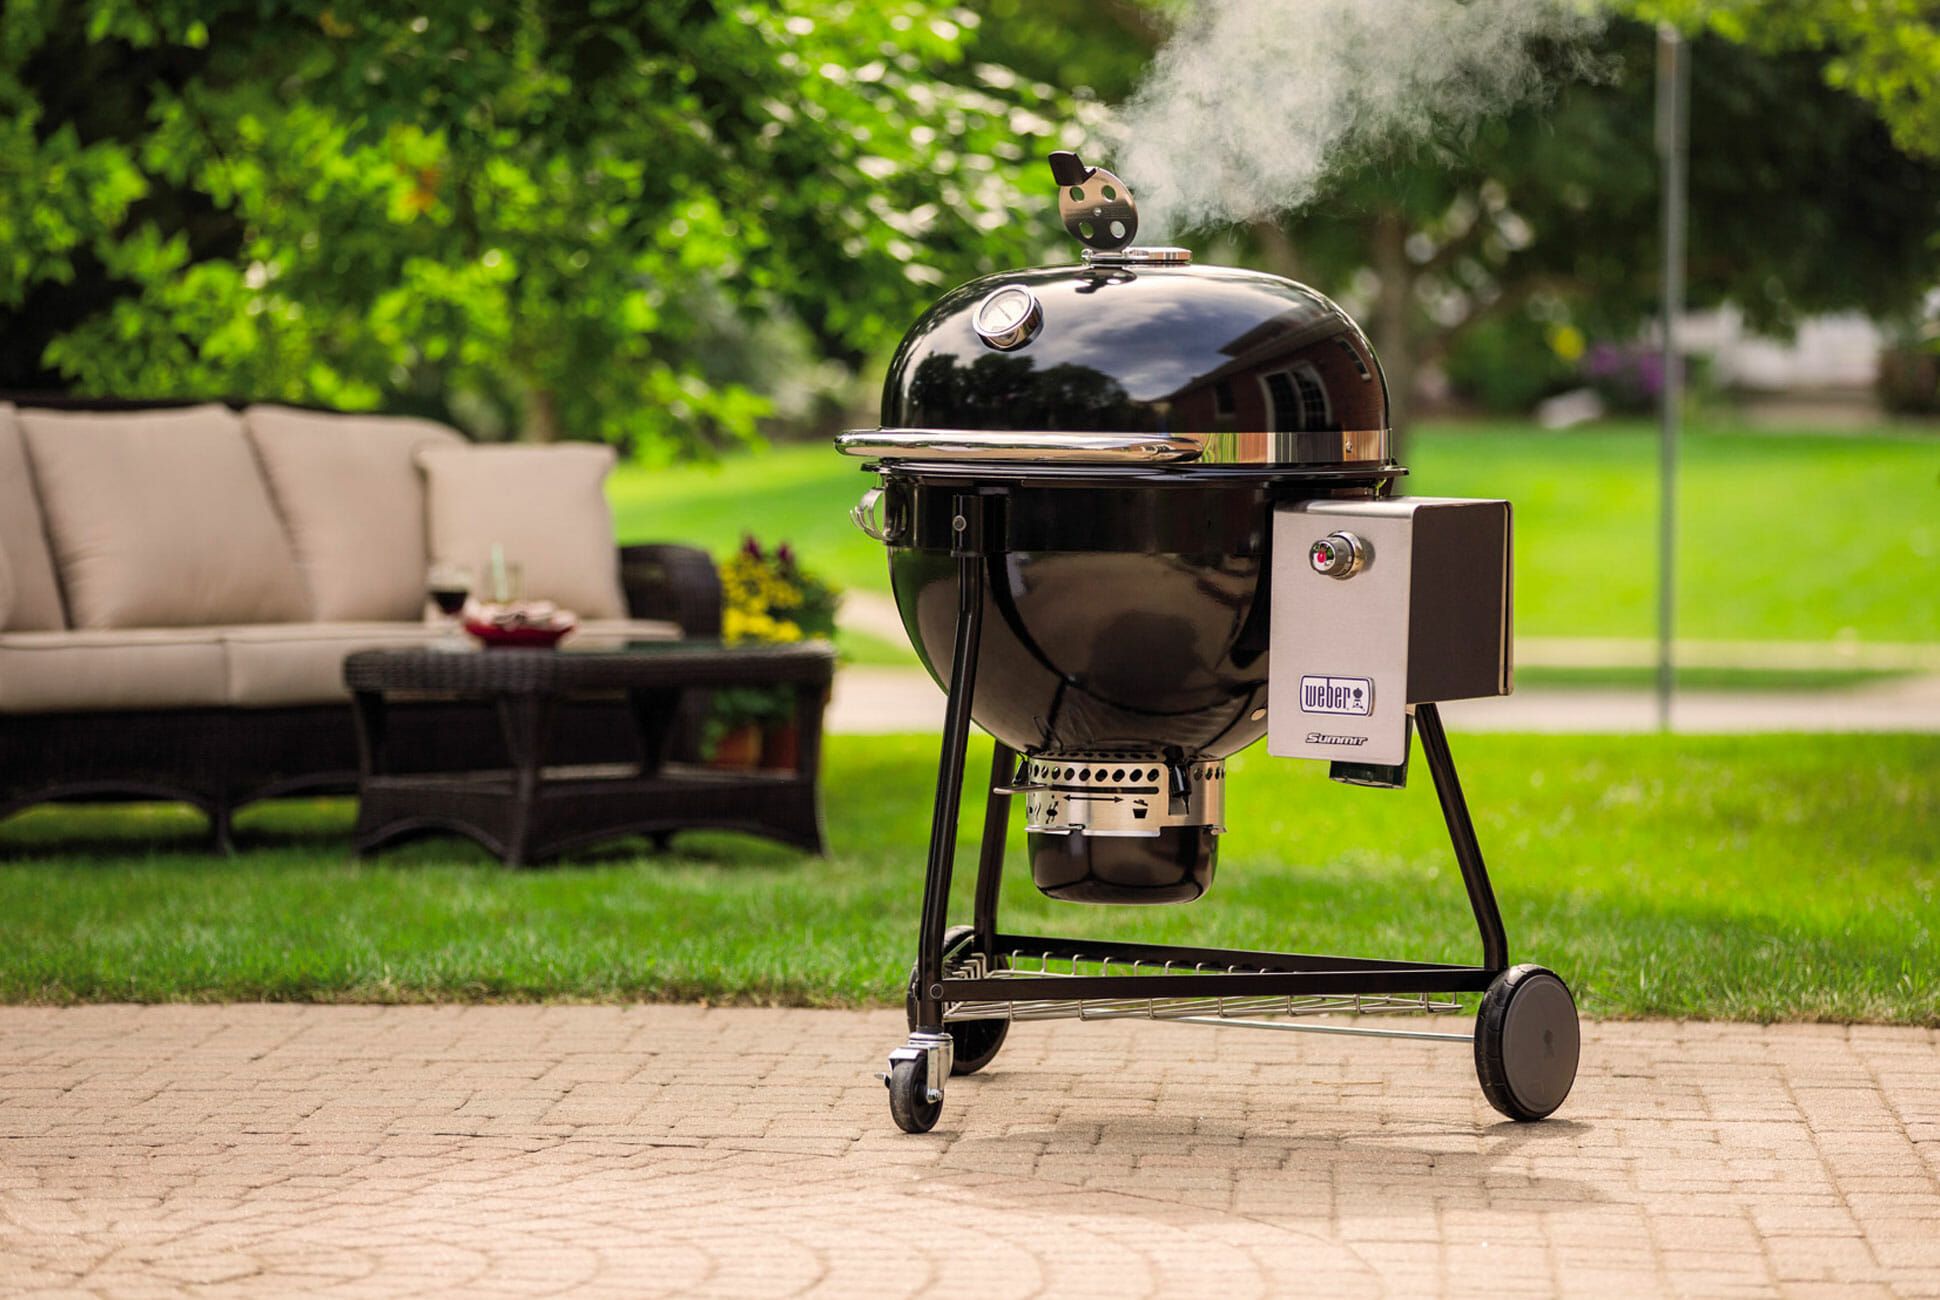 Buying to Grills: Every Model Explained